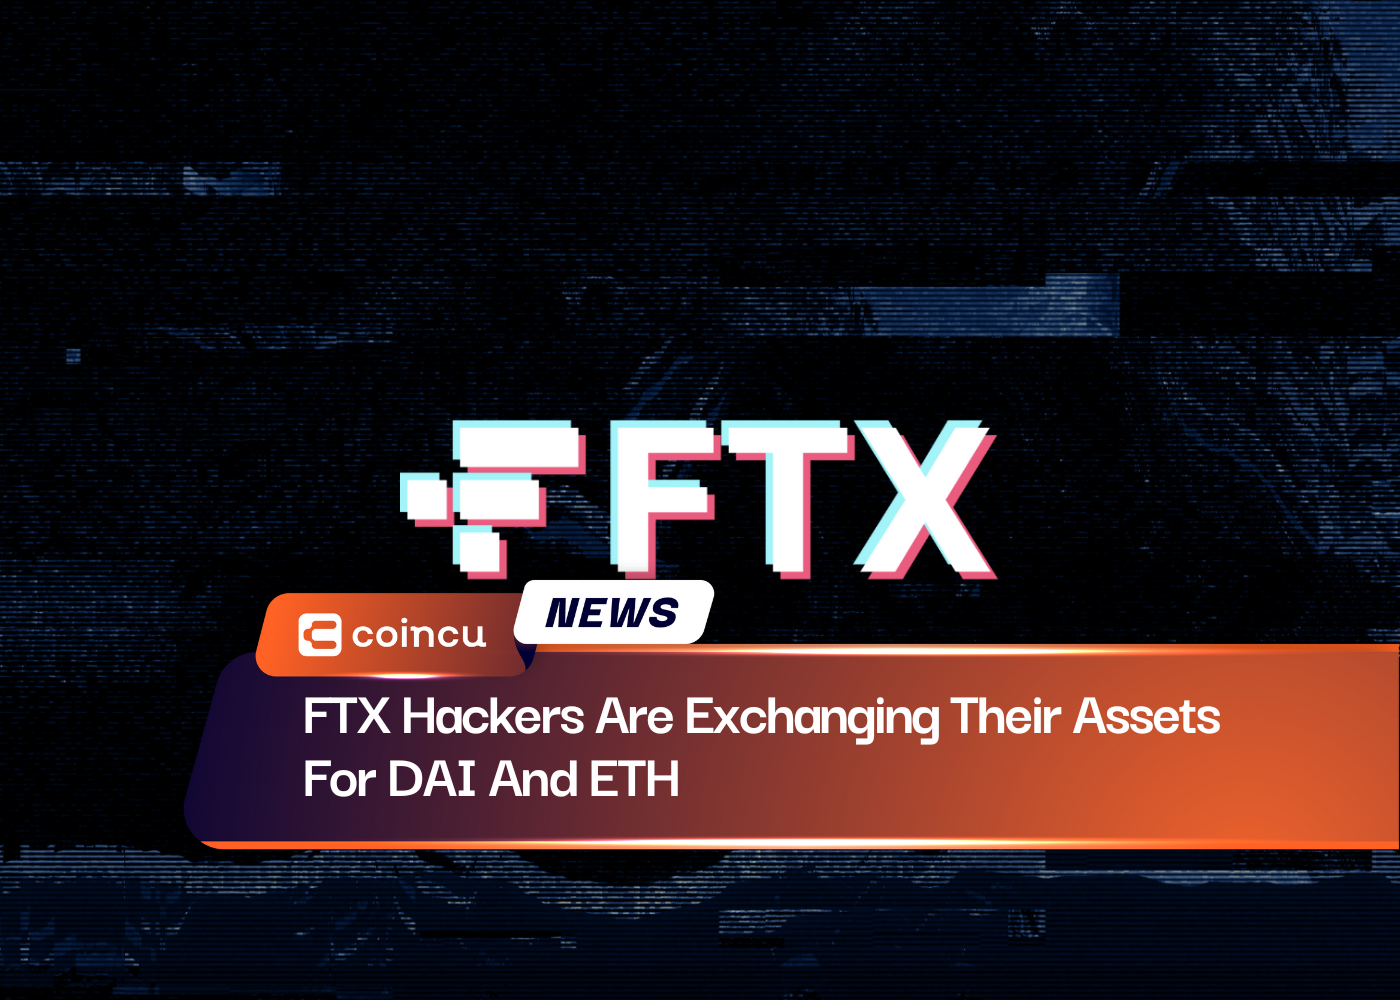 FTX Hackers Are Exchanging Their Assets For DAI And ETH